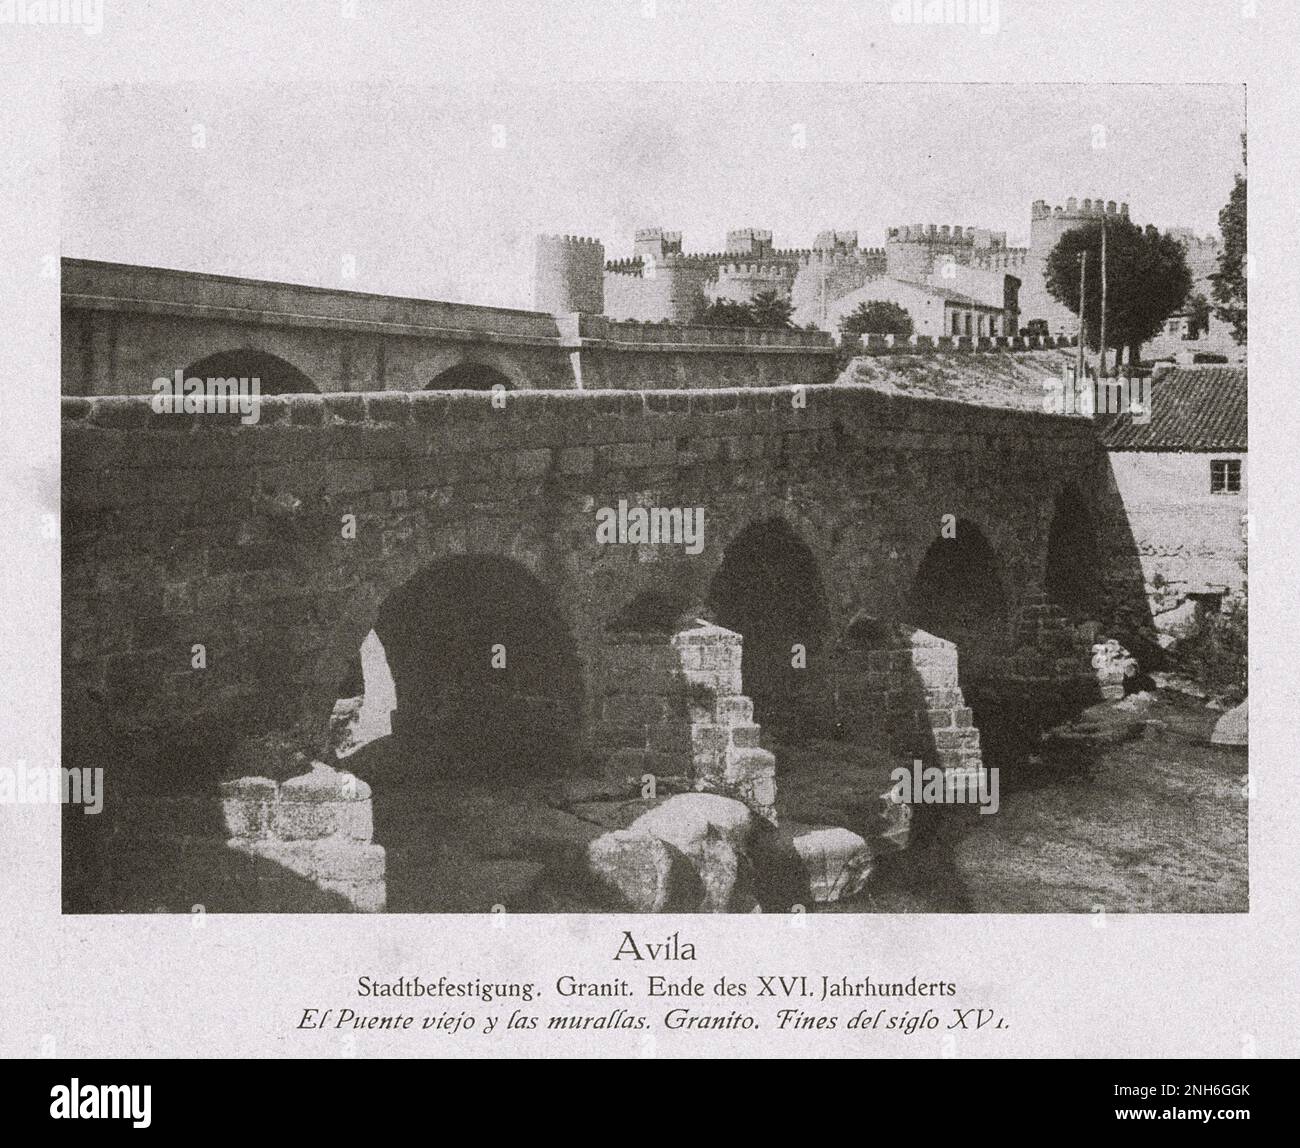 Architecture of Old Spain. Vintage photo of Avila. Fortification. Granite. At the end of the XVI century. Distinctly known by its medieval walls, Ávila is sometimes called the Town of Stones and Saints. It has complete and prominent medieval town walls, built in the Romanesque style. Stock Photo